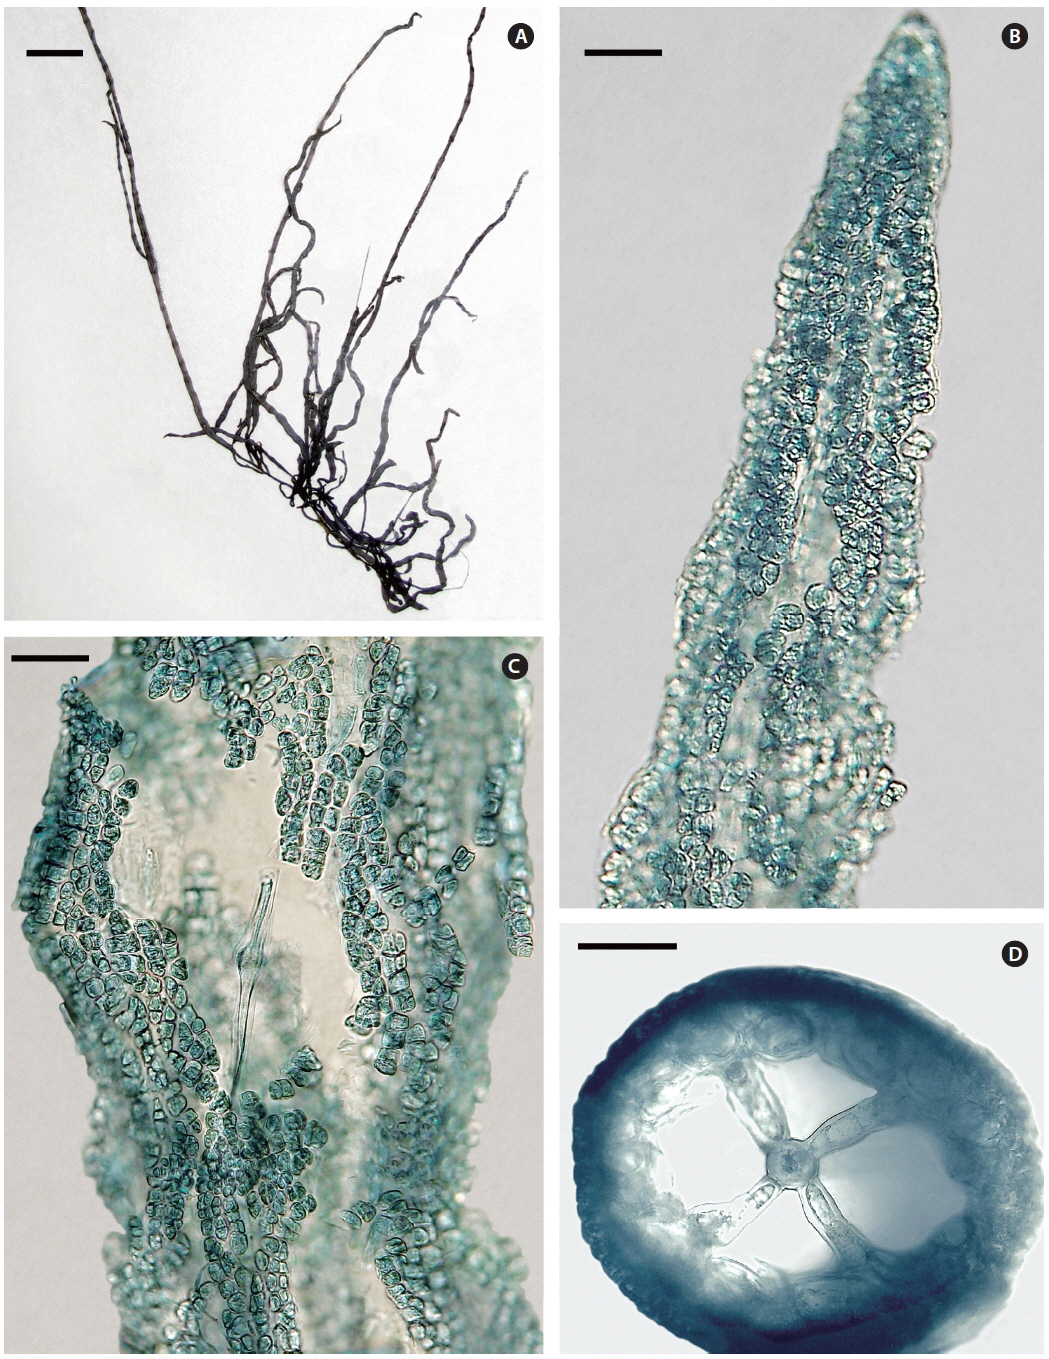 Lemanea manipurensis E. K. Ganesan, J. A. West, Zuccarello et J. Rout sp. nov. Specimens for B-D lightly stained with aniline blue. (A) Holotype. Dried thallus showing natural colour, minimal branching and elongate basal stolon. (B) Slightly squashed apical sector of branch showing the outer cell layers and central axial filament. (C) Slightly squashed midsection of branch showing the axial filament devoid of cortical filaments. (D) Cross section of branch showing the four basal cells of the outer whorl branchlets at a node. Scale bars represent: A, 5 mm; B & C, 30 μm; D, 20 μm.